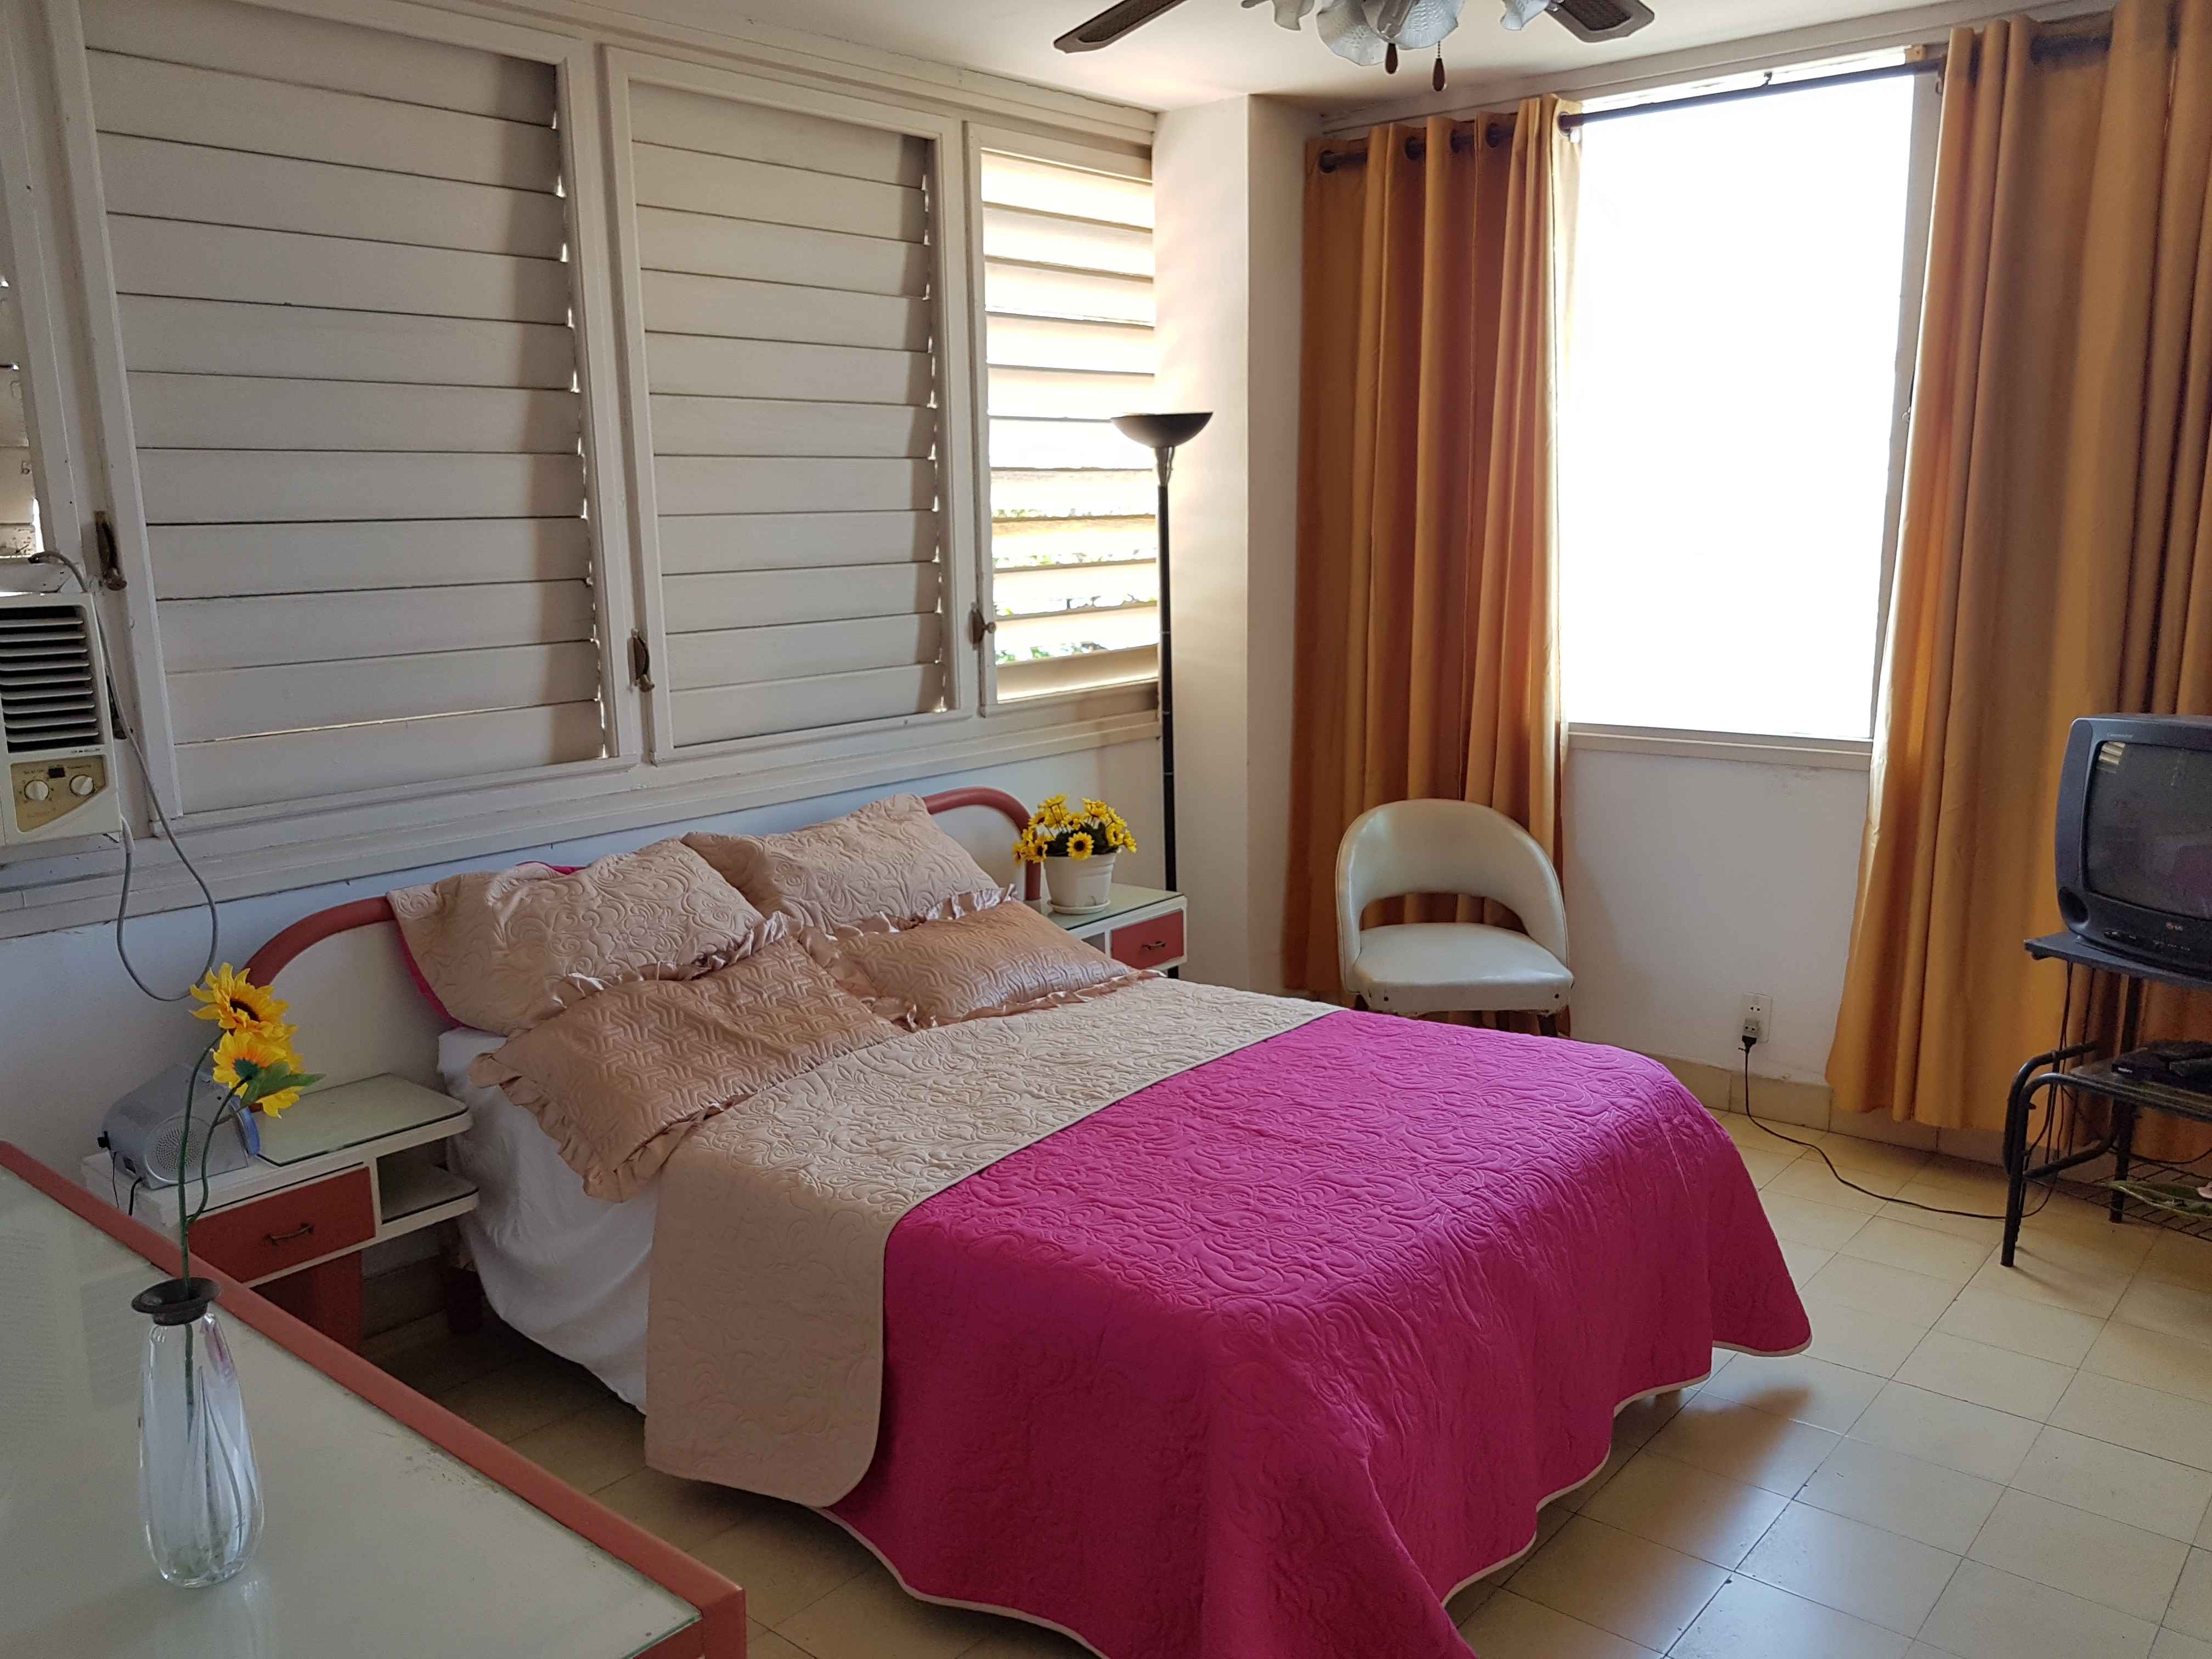 HAV310 – Room 1 Double room with private bathroom